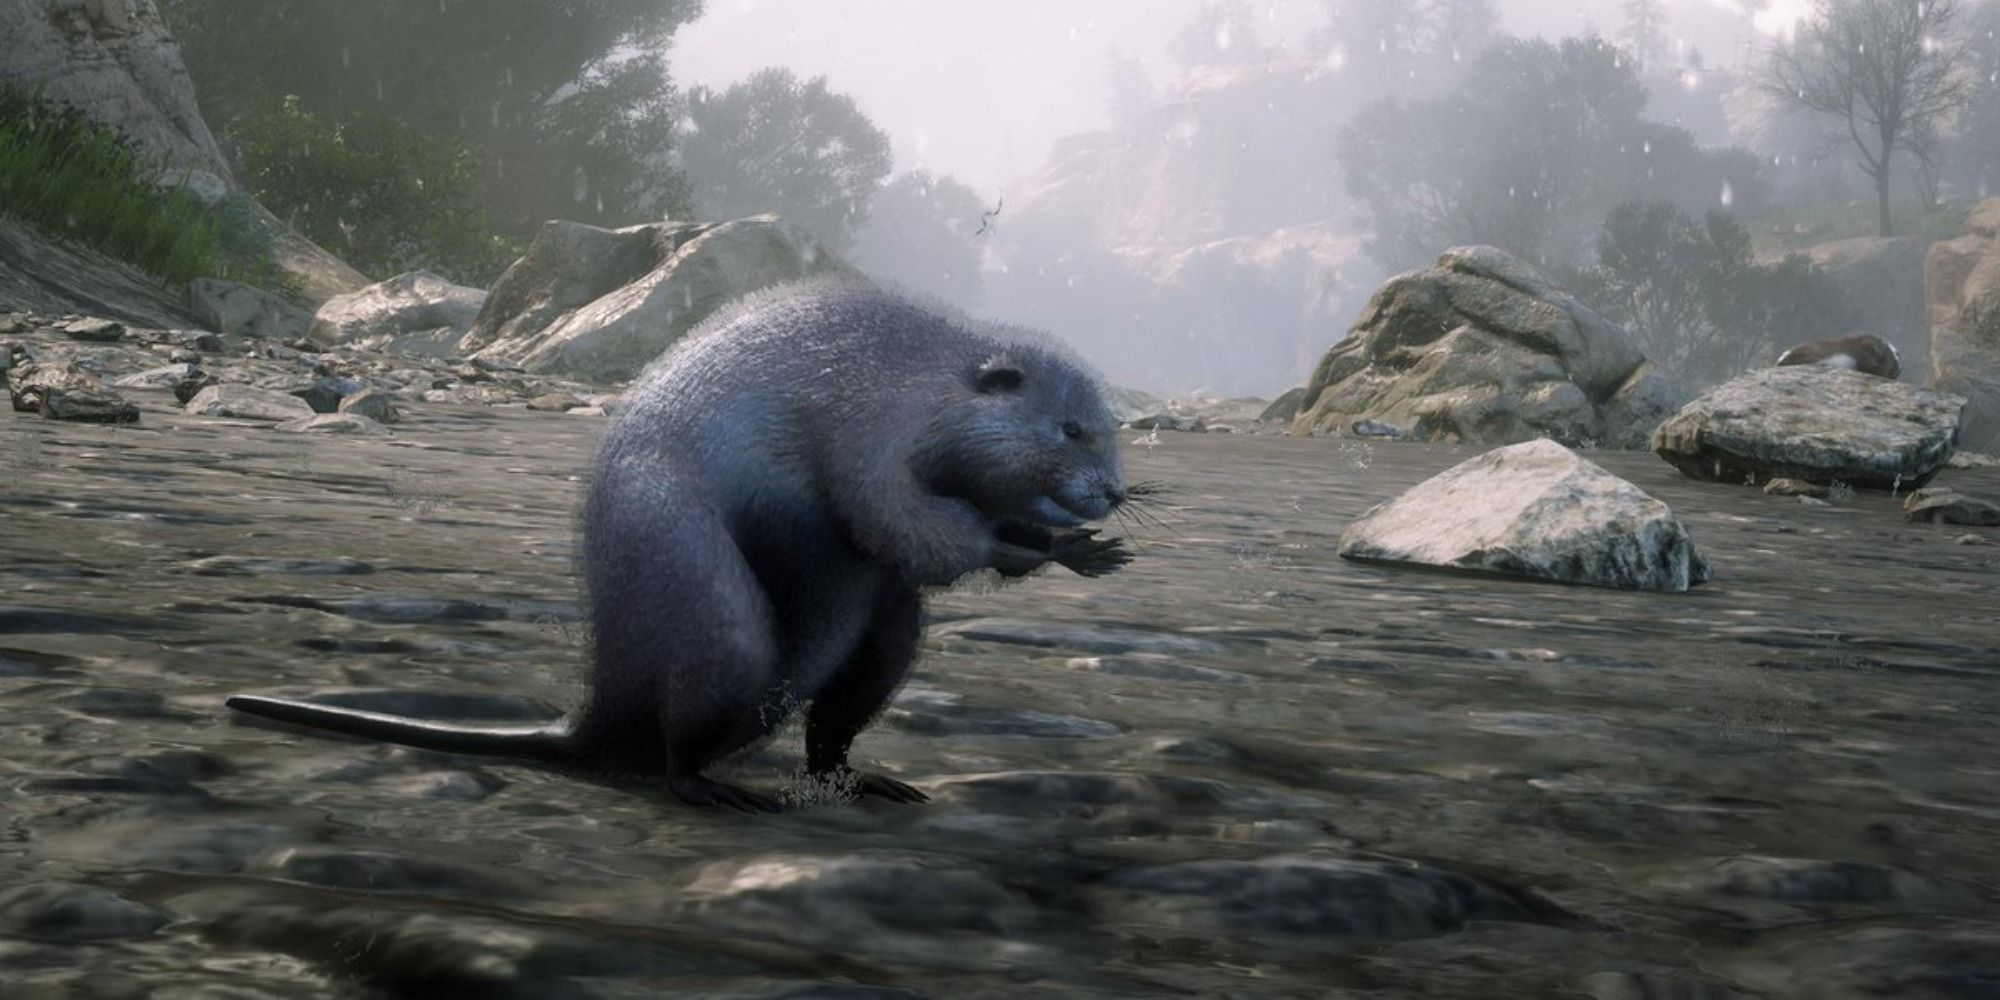 An image of the Muskrat from Red Dead Redemption 2, a small gray rodent that lives around rivers.